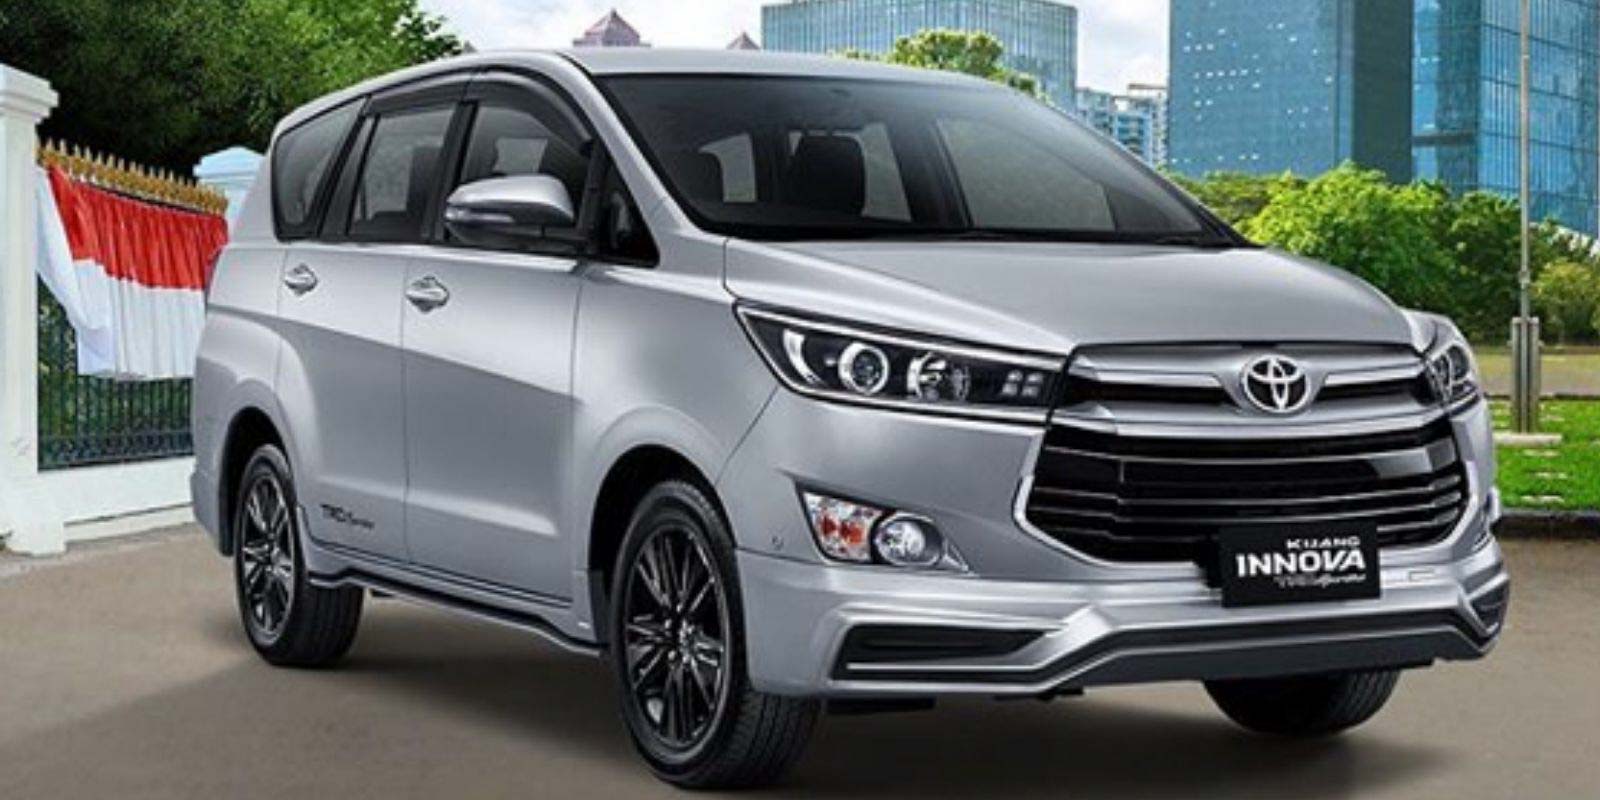 7 Things To Know About The Upcoming Toyota Innova Crysta Facelift